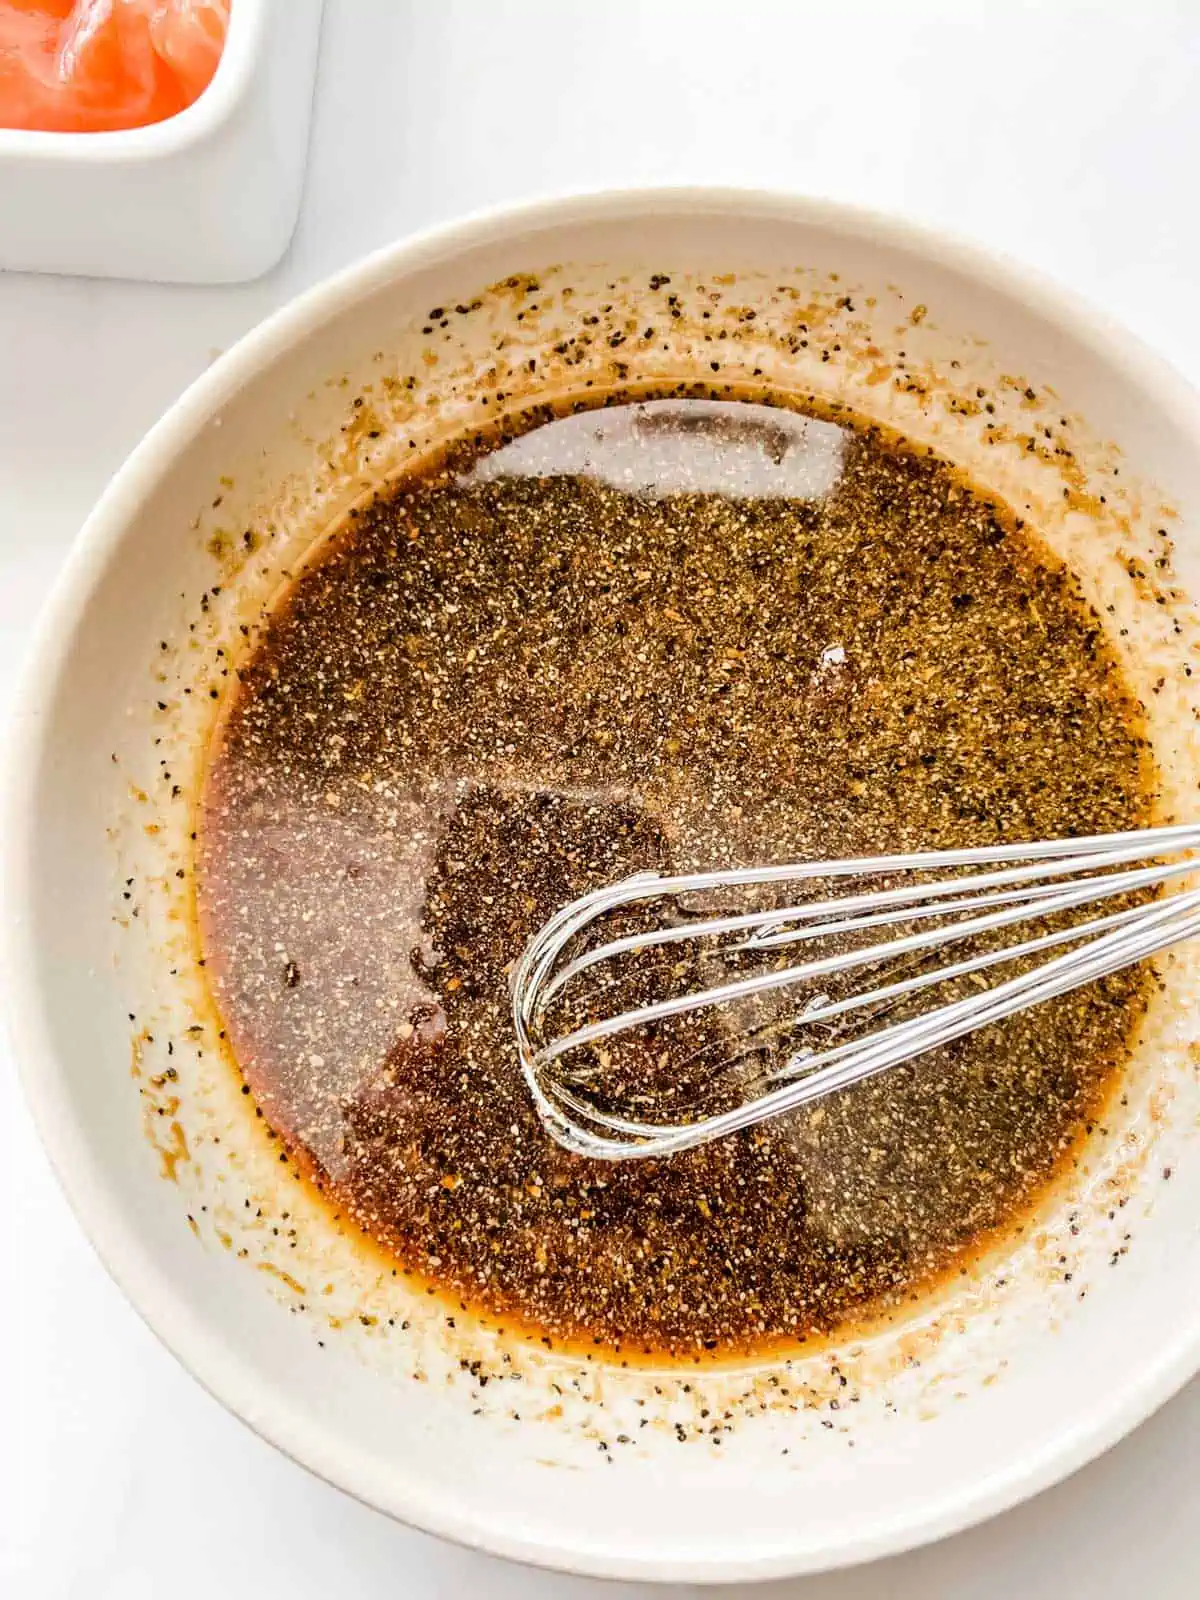 Photo of salmon marinade being whisked together in a small bowl.